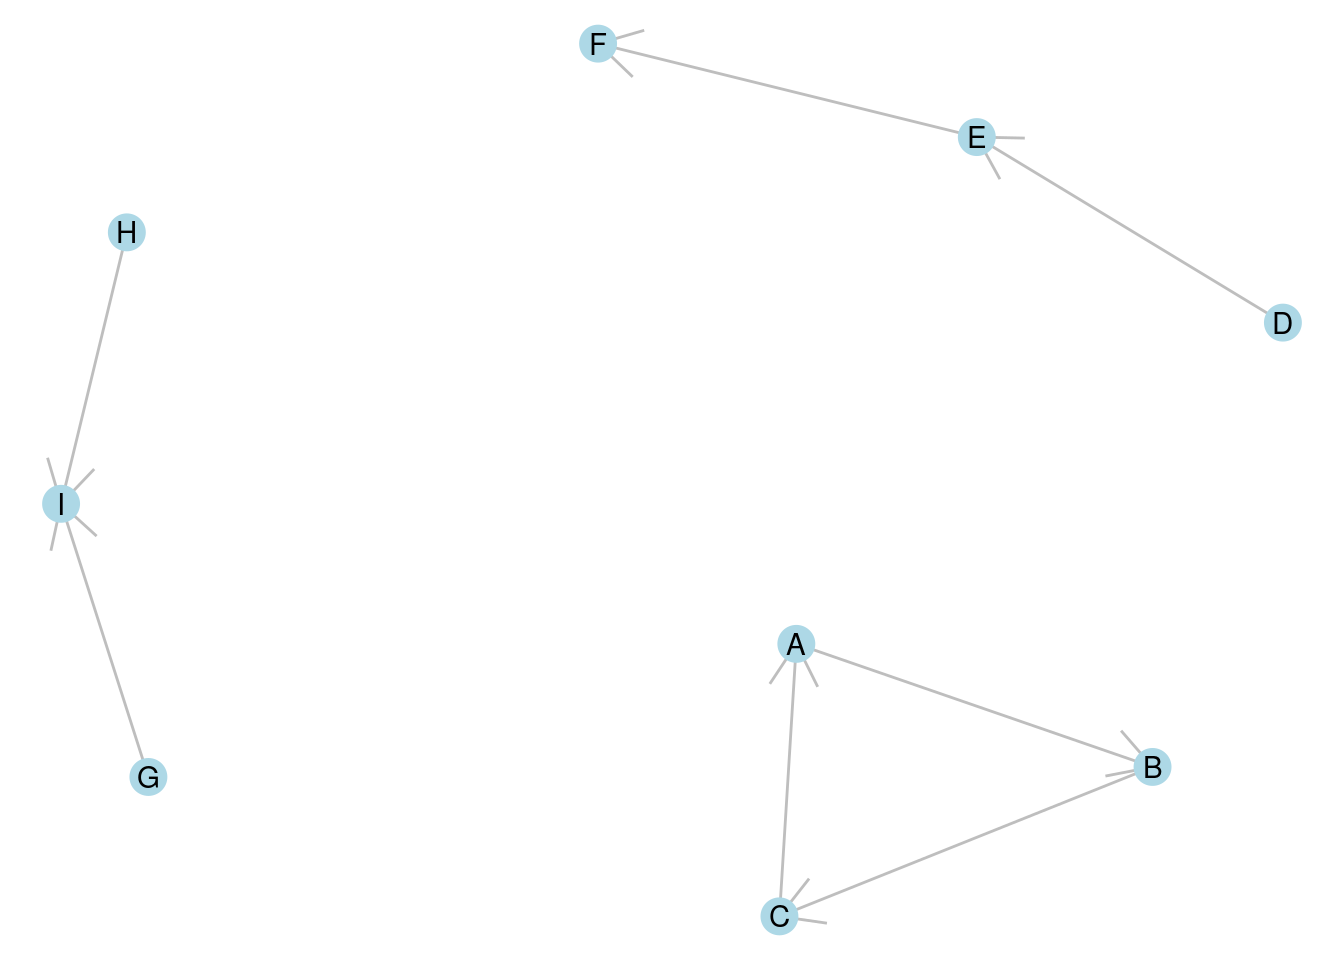 A directed graph with three connected components, one strongly connected, one weakly connected and one unilaterally connected